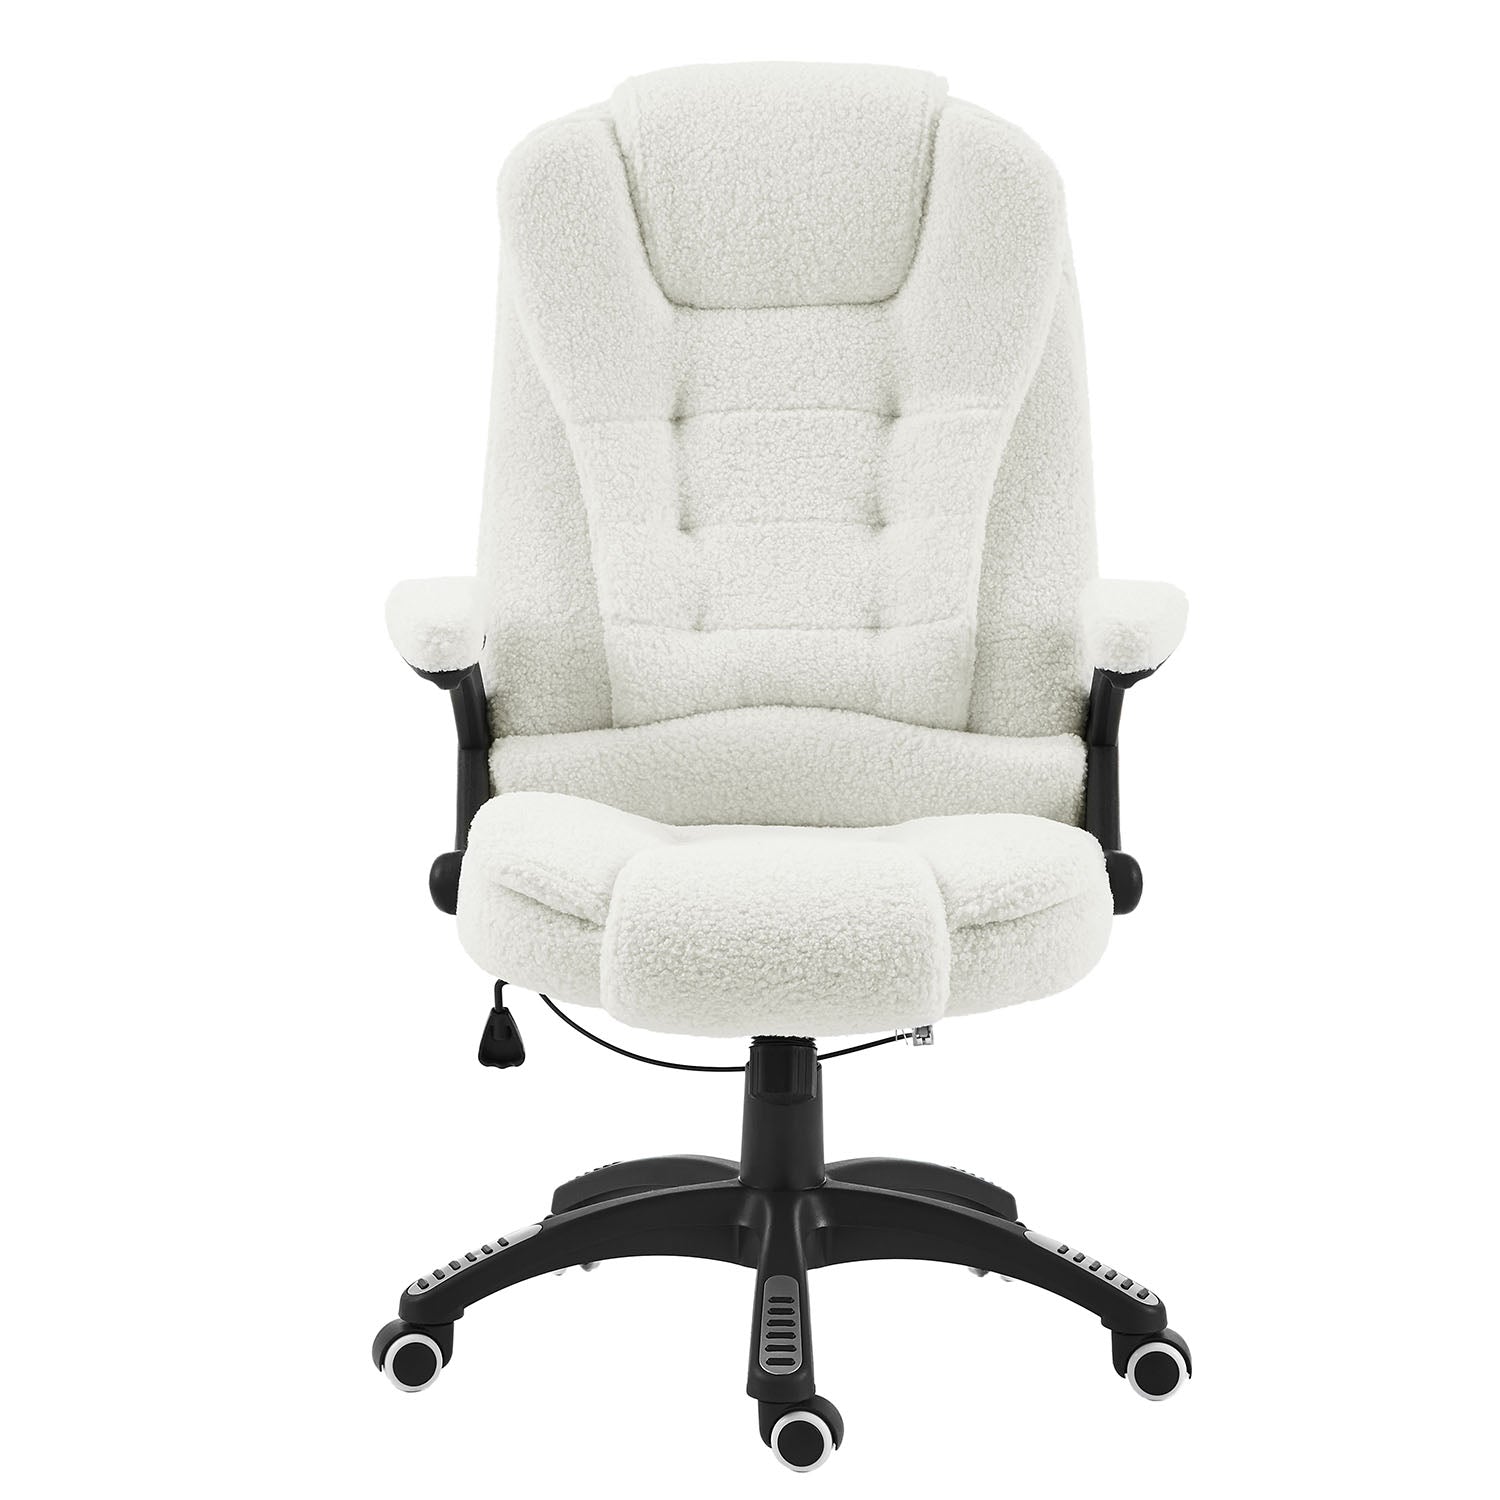 Cherry Tree Furniture Executive Recline Extra Padded Office Chair 